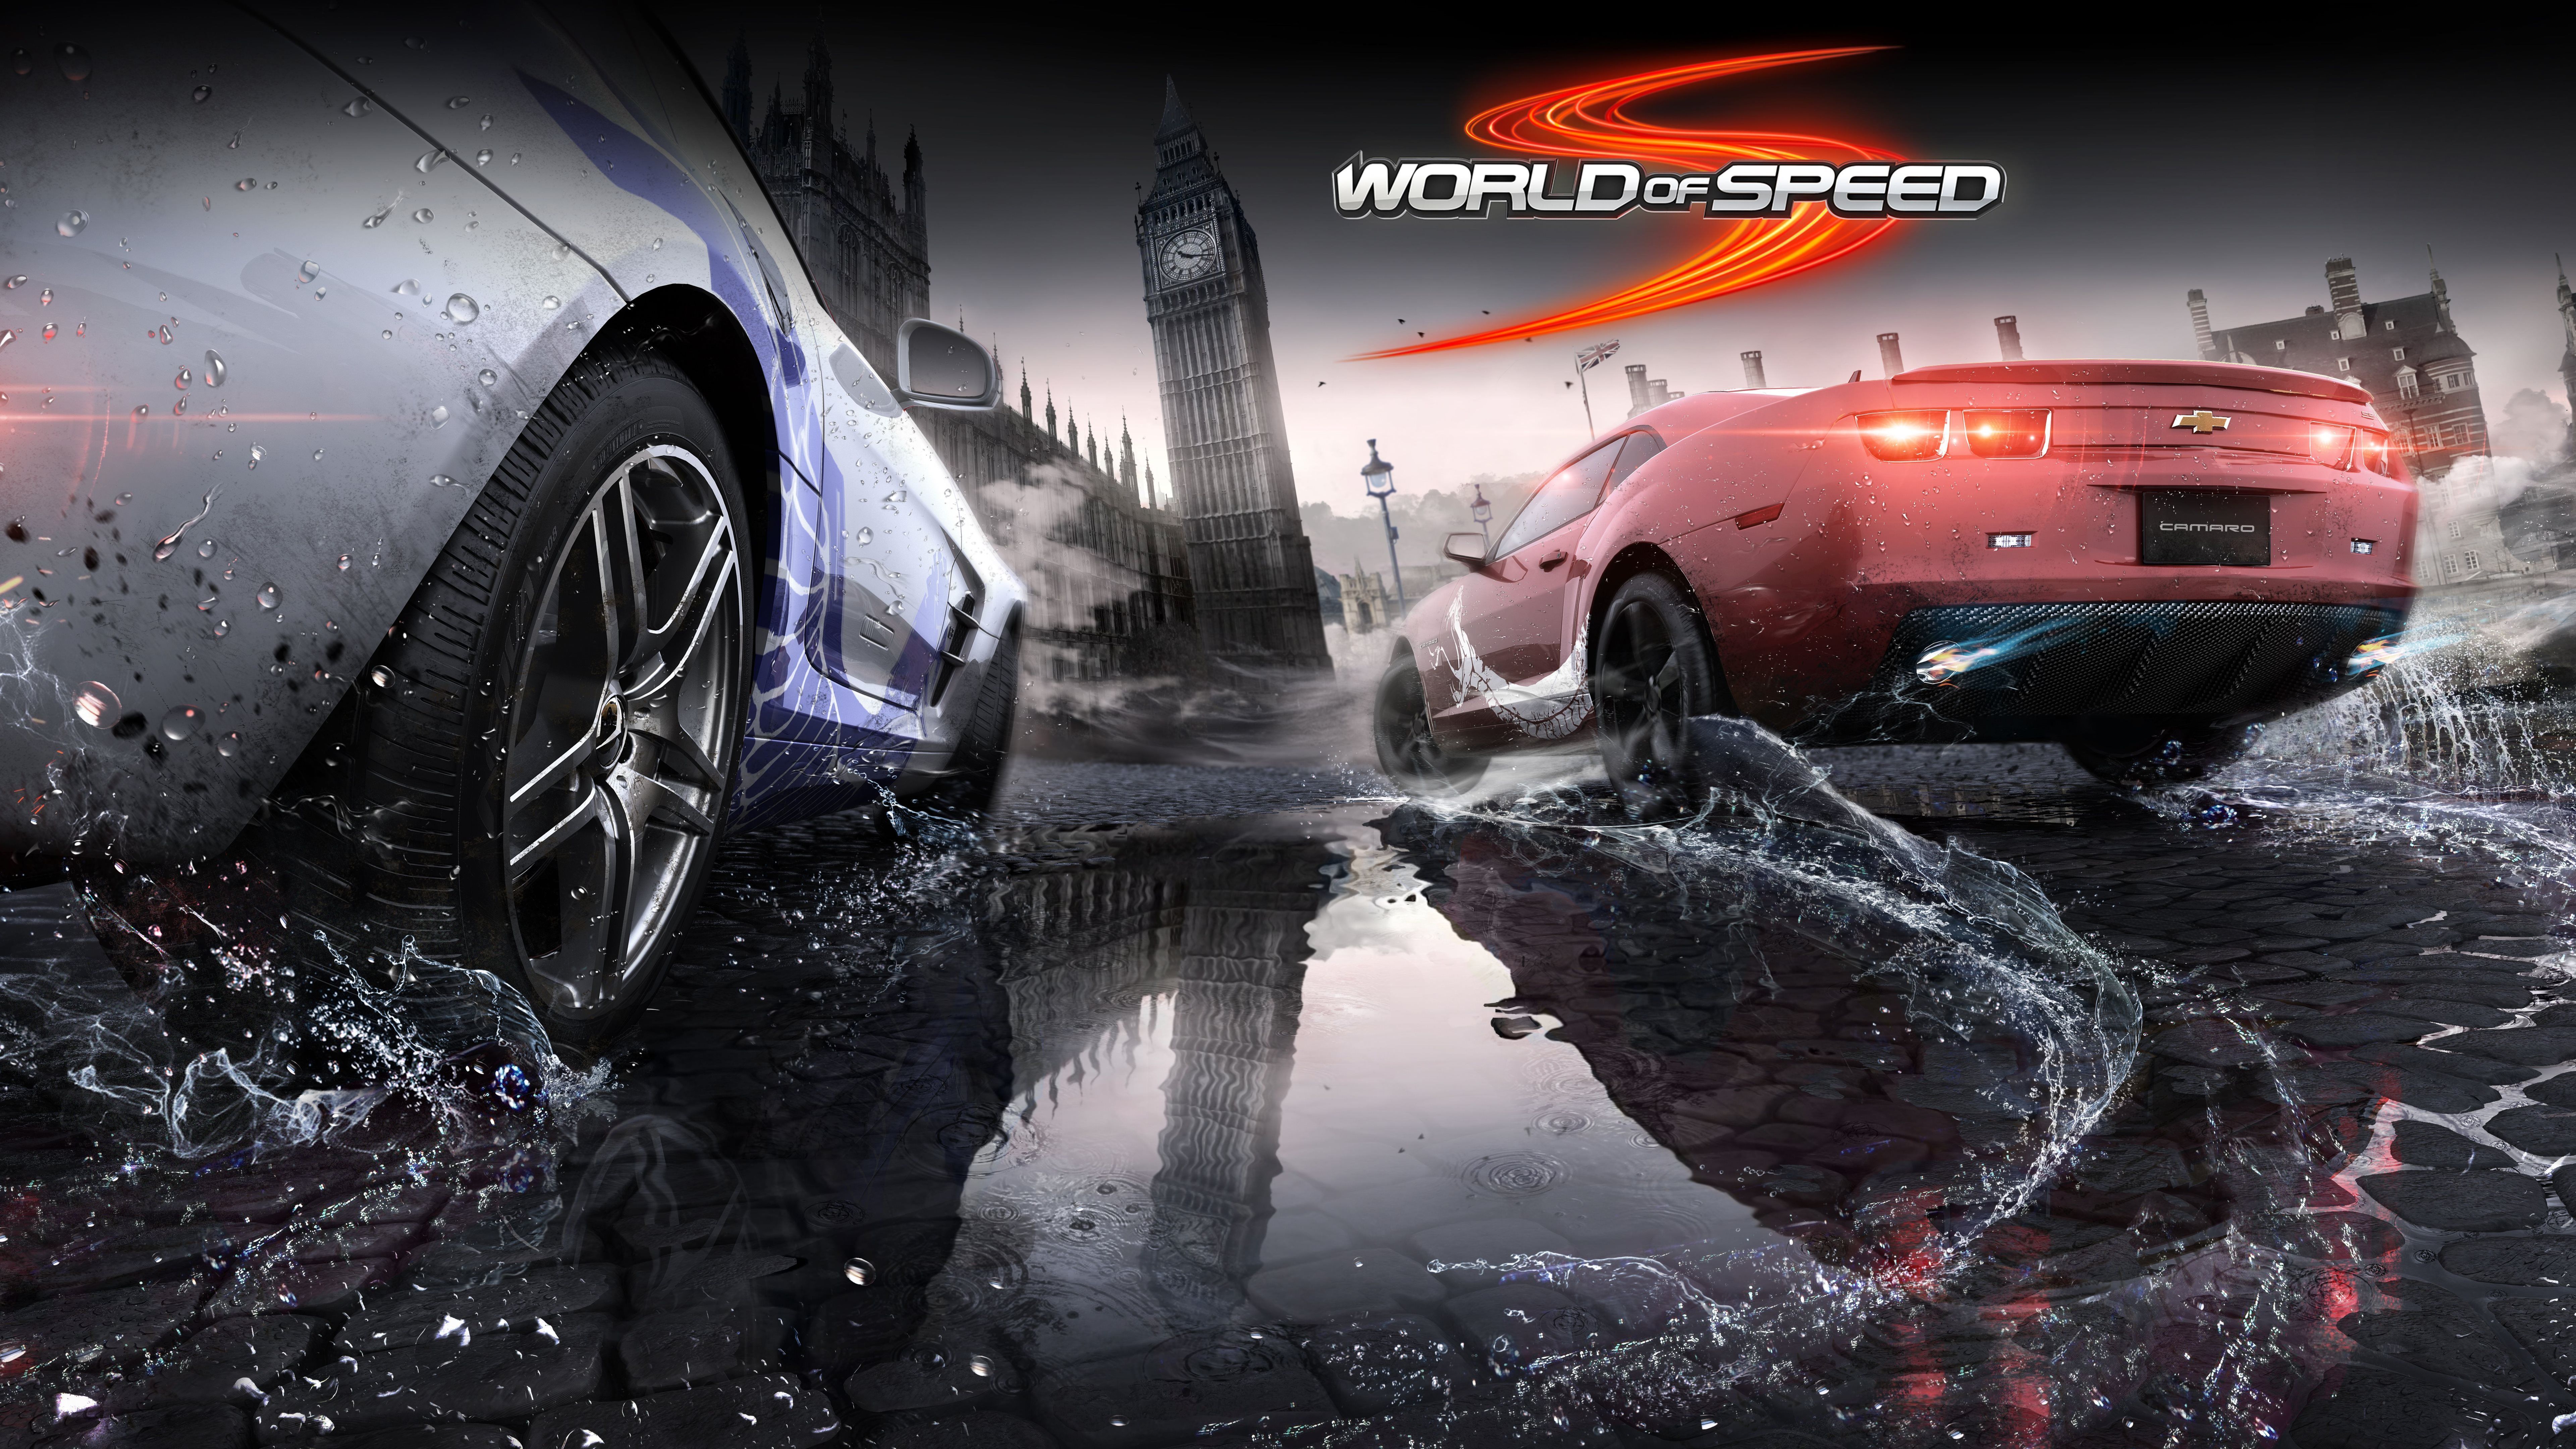 World of Speed Wallpapers :: HD Wallpapers